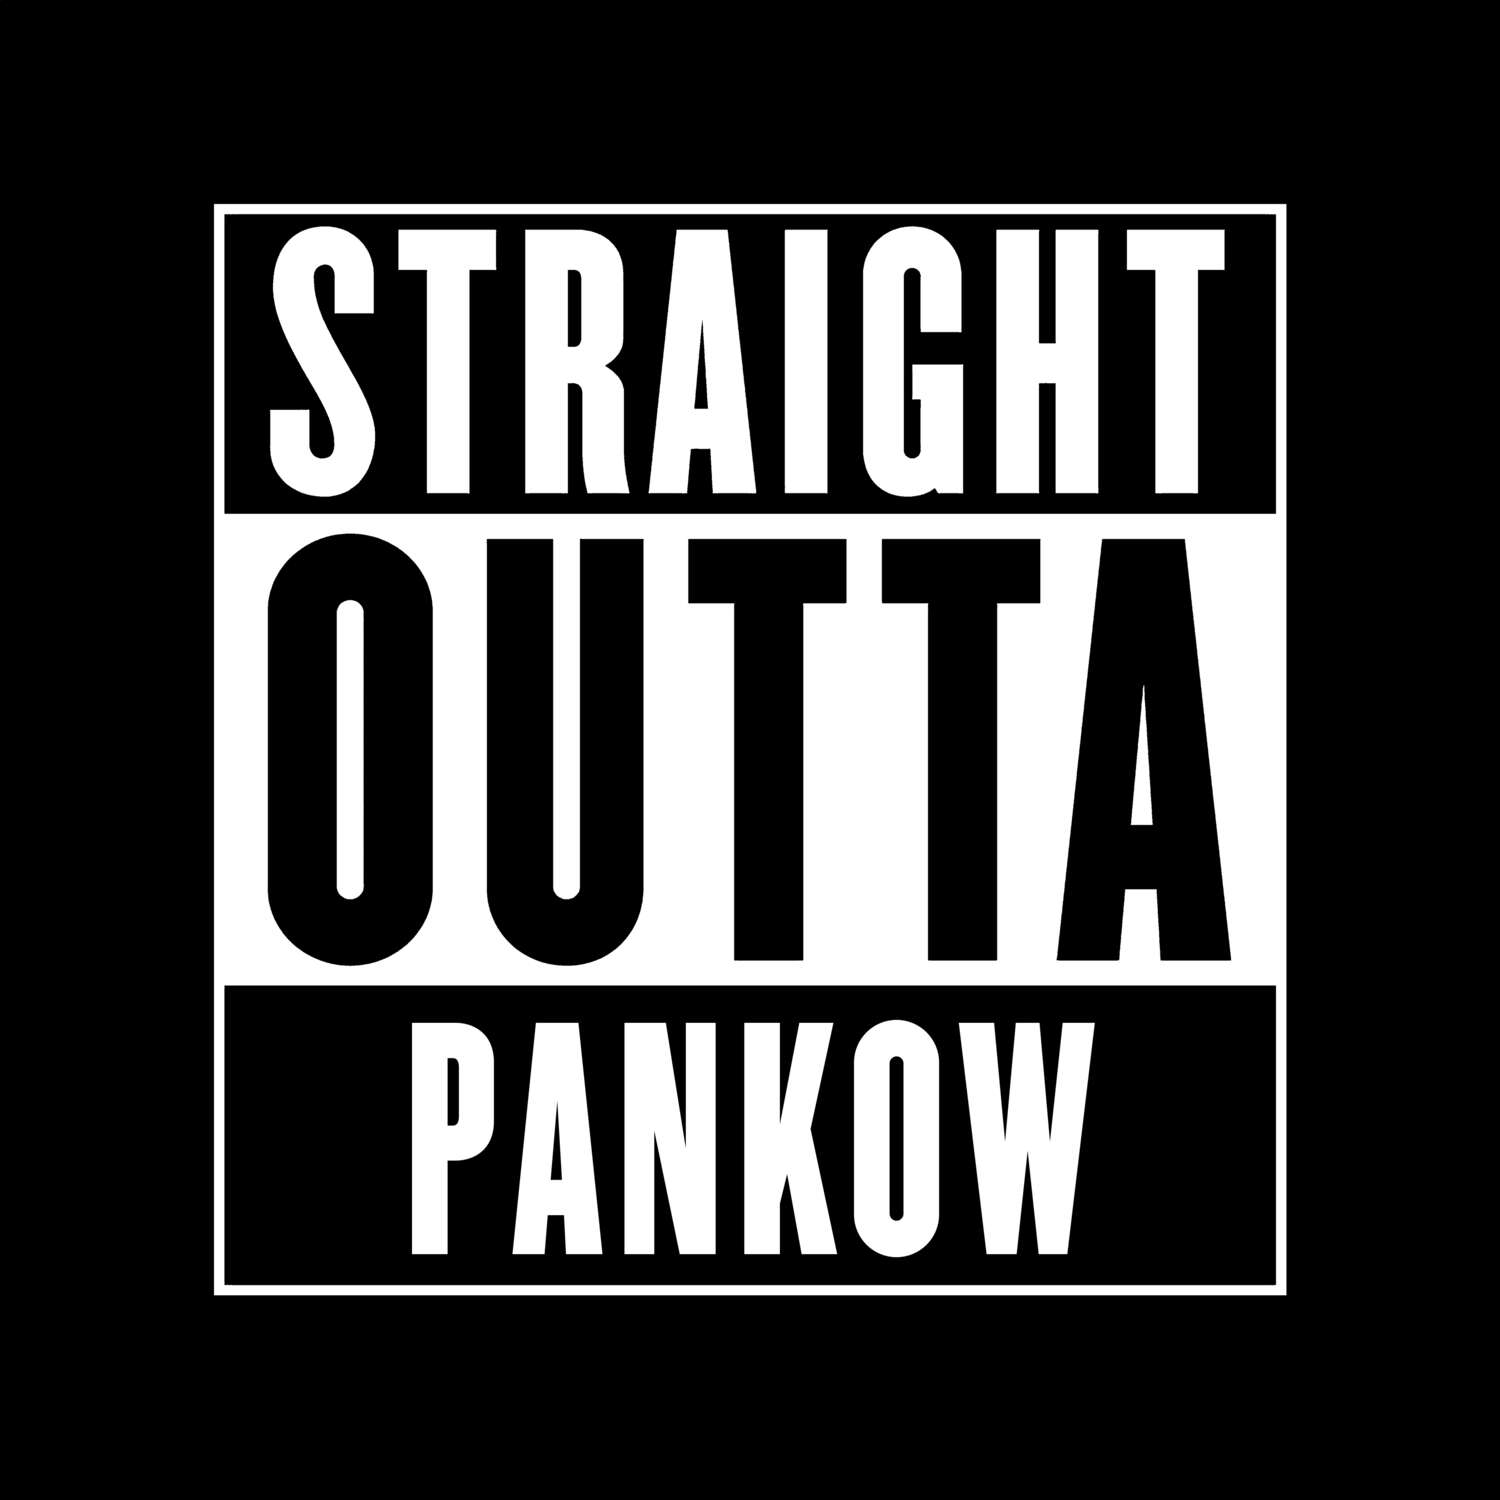 Pankow T-Shirt »Straight Outta«